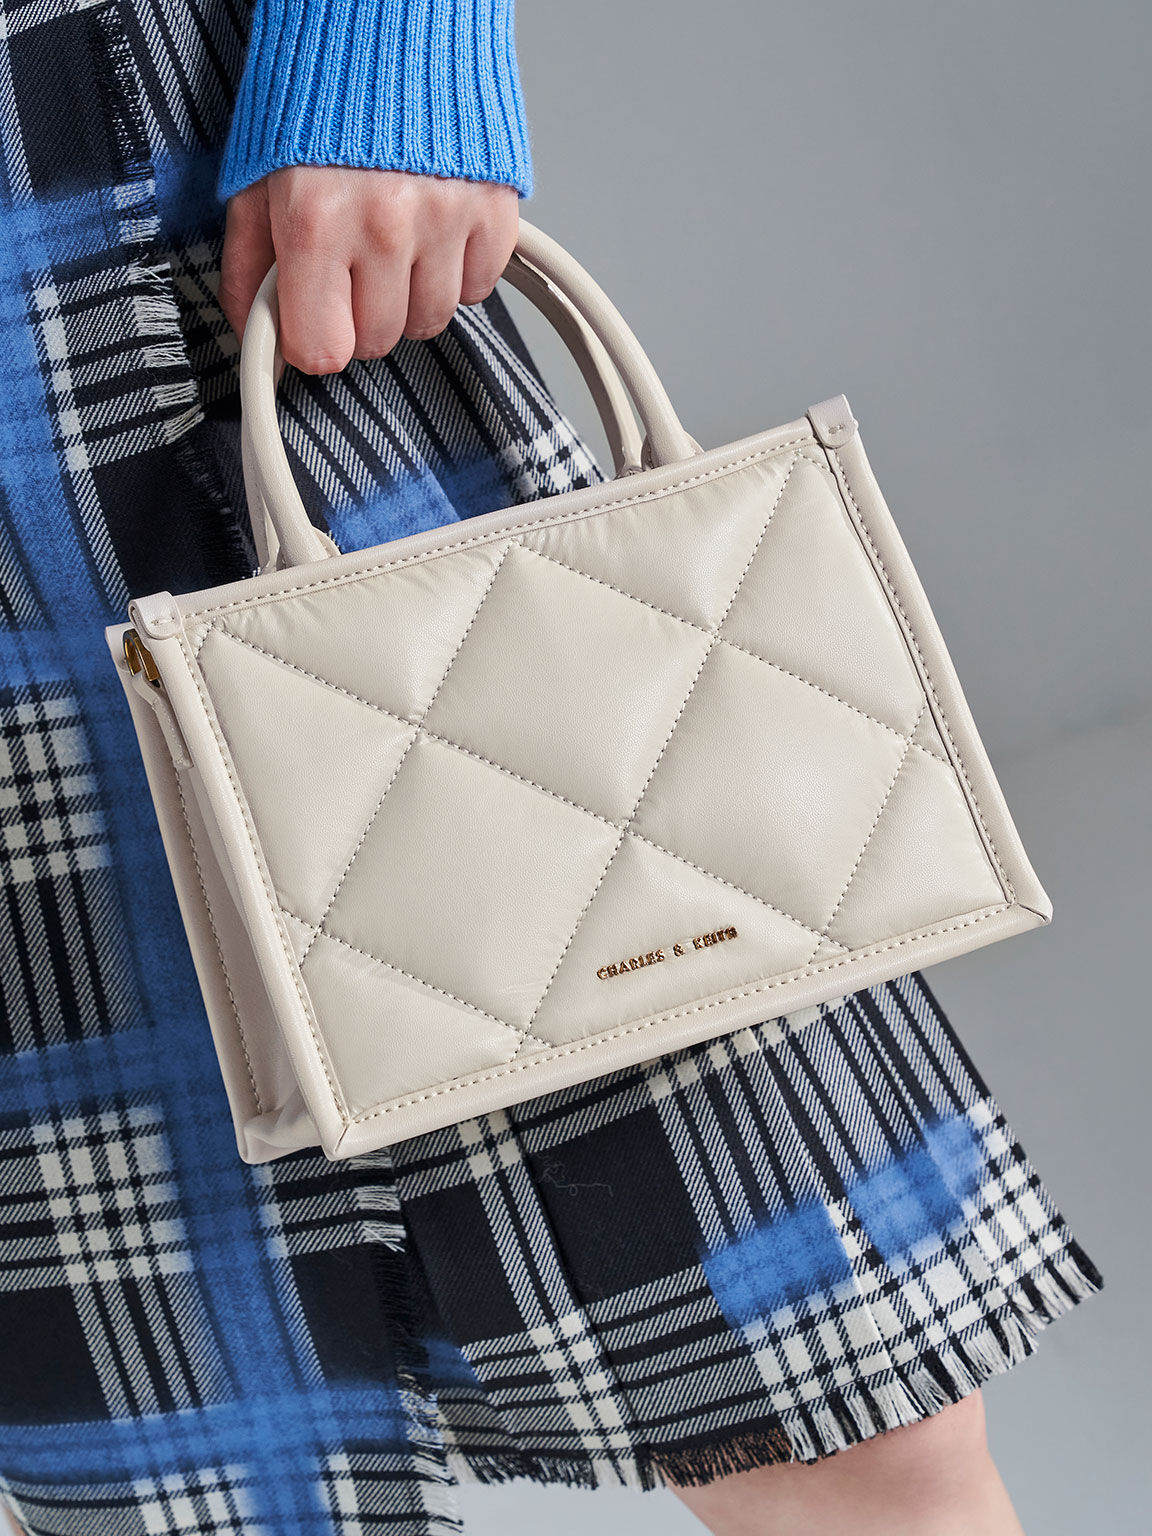 TÚI ĐEO CHÉO CHARLES KEITH QUILTED DOUBLE HANDLE TOTE BAG 28